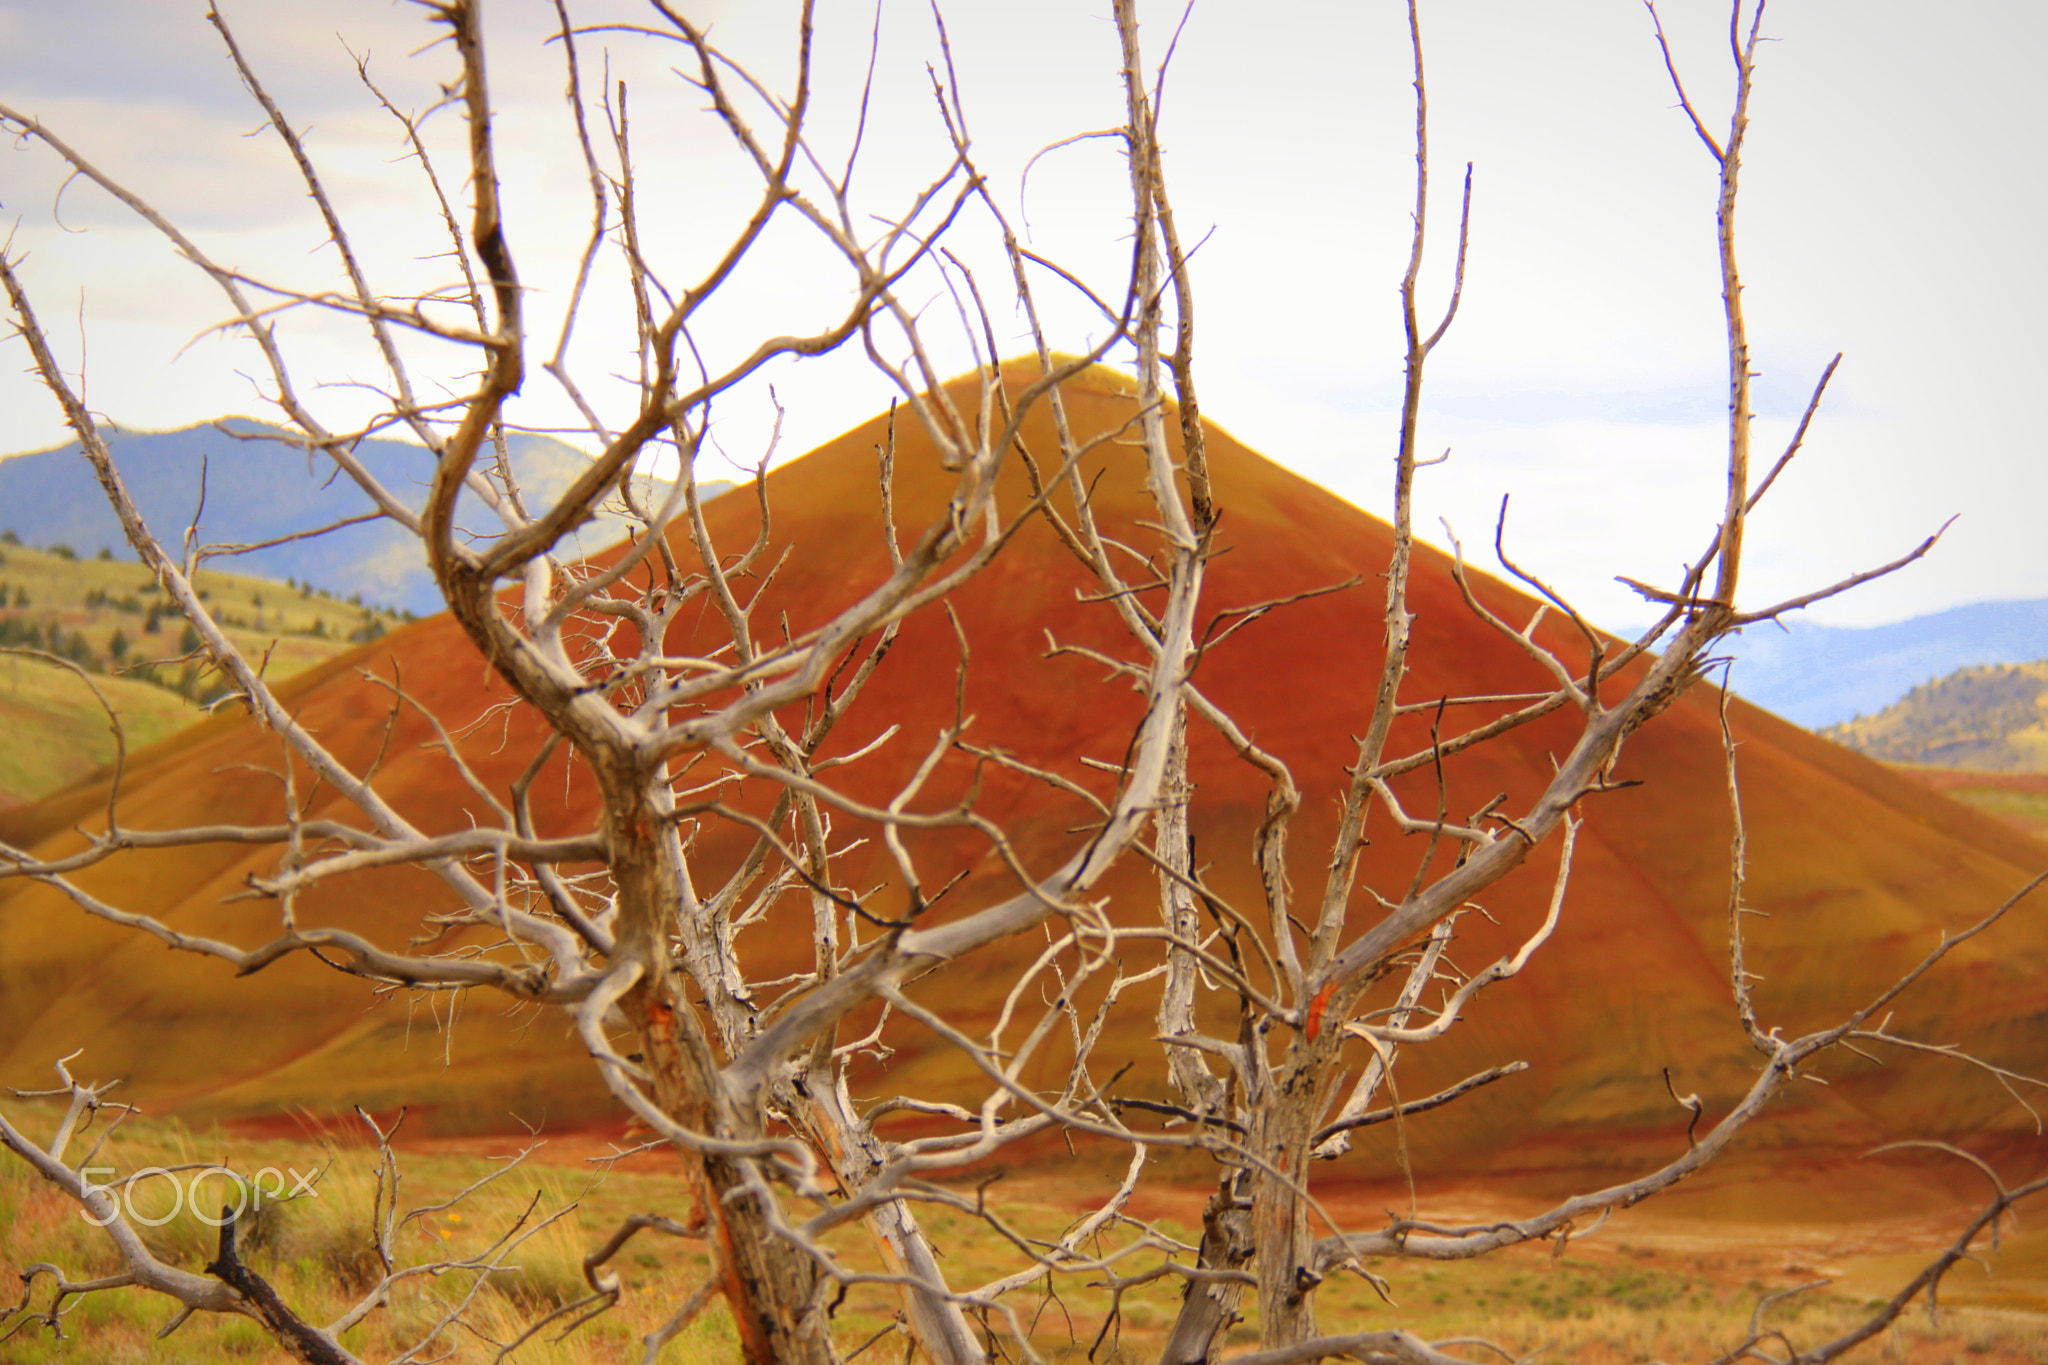 Nature's heart beats strong amid the Painted hills